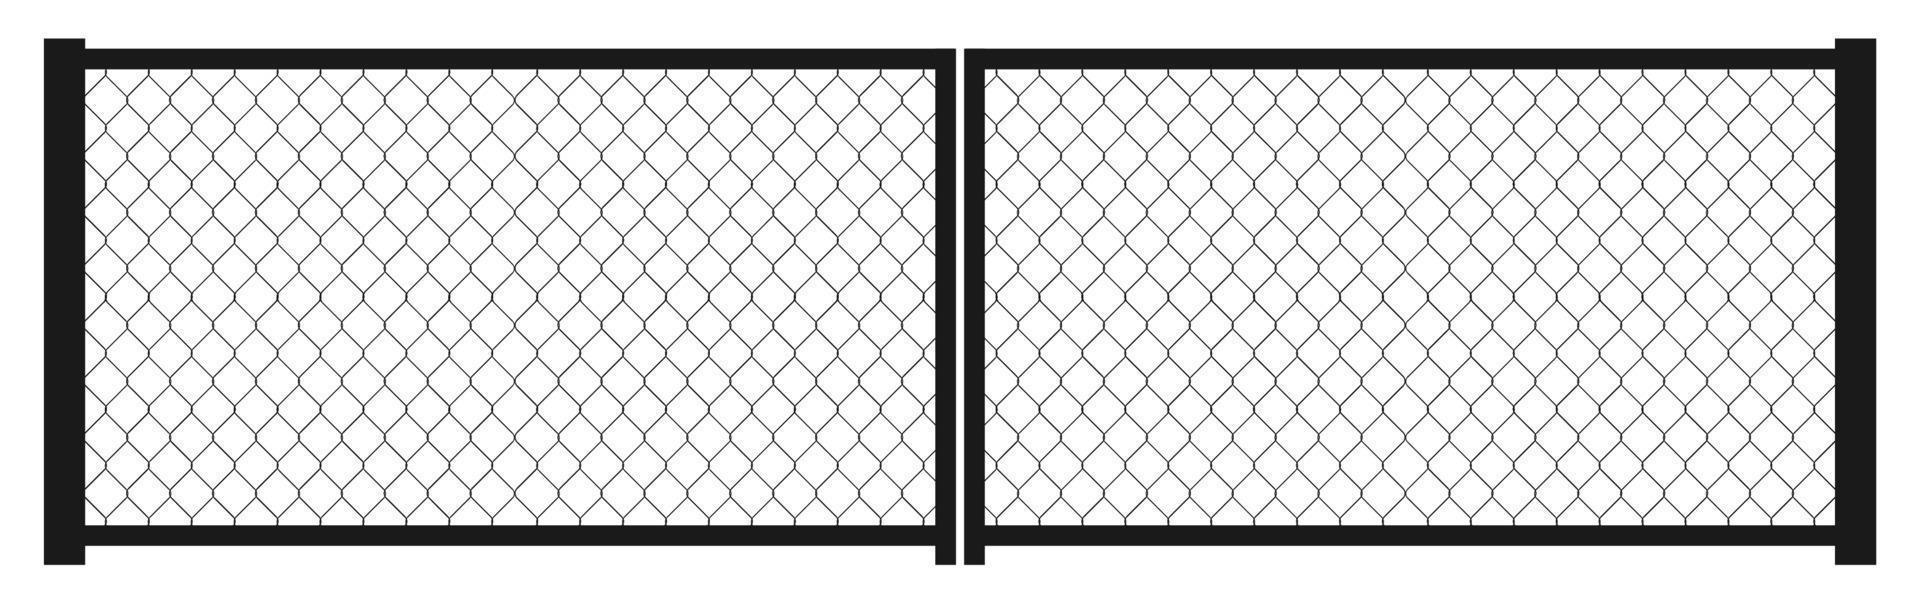 Flat style home fence vector icon for background needs. vector illustration